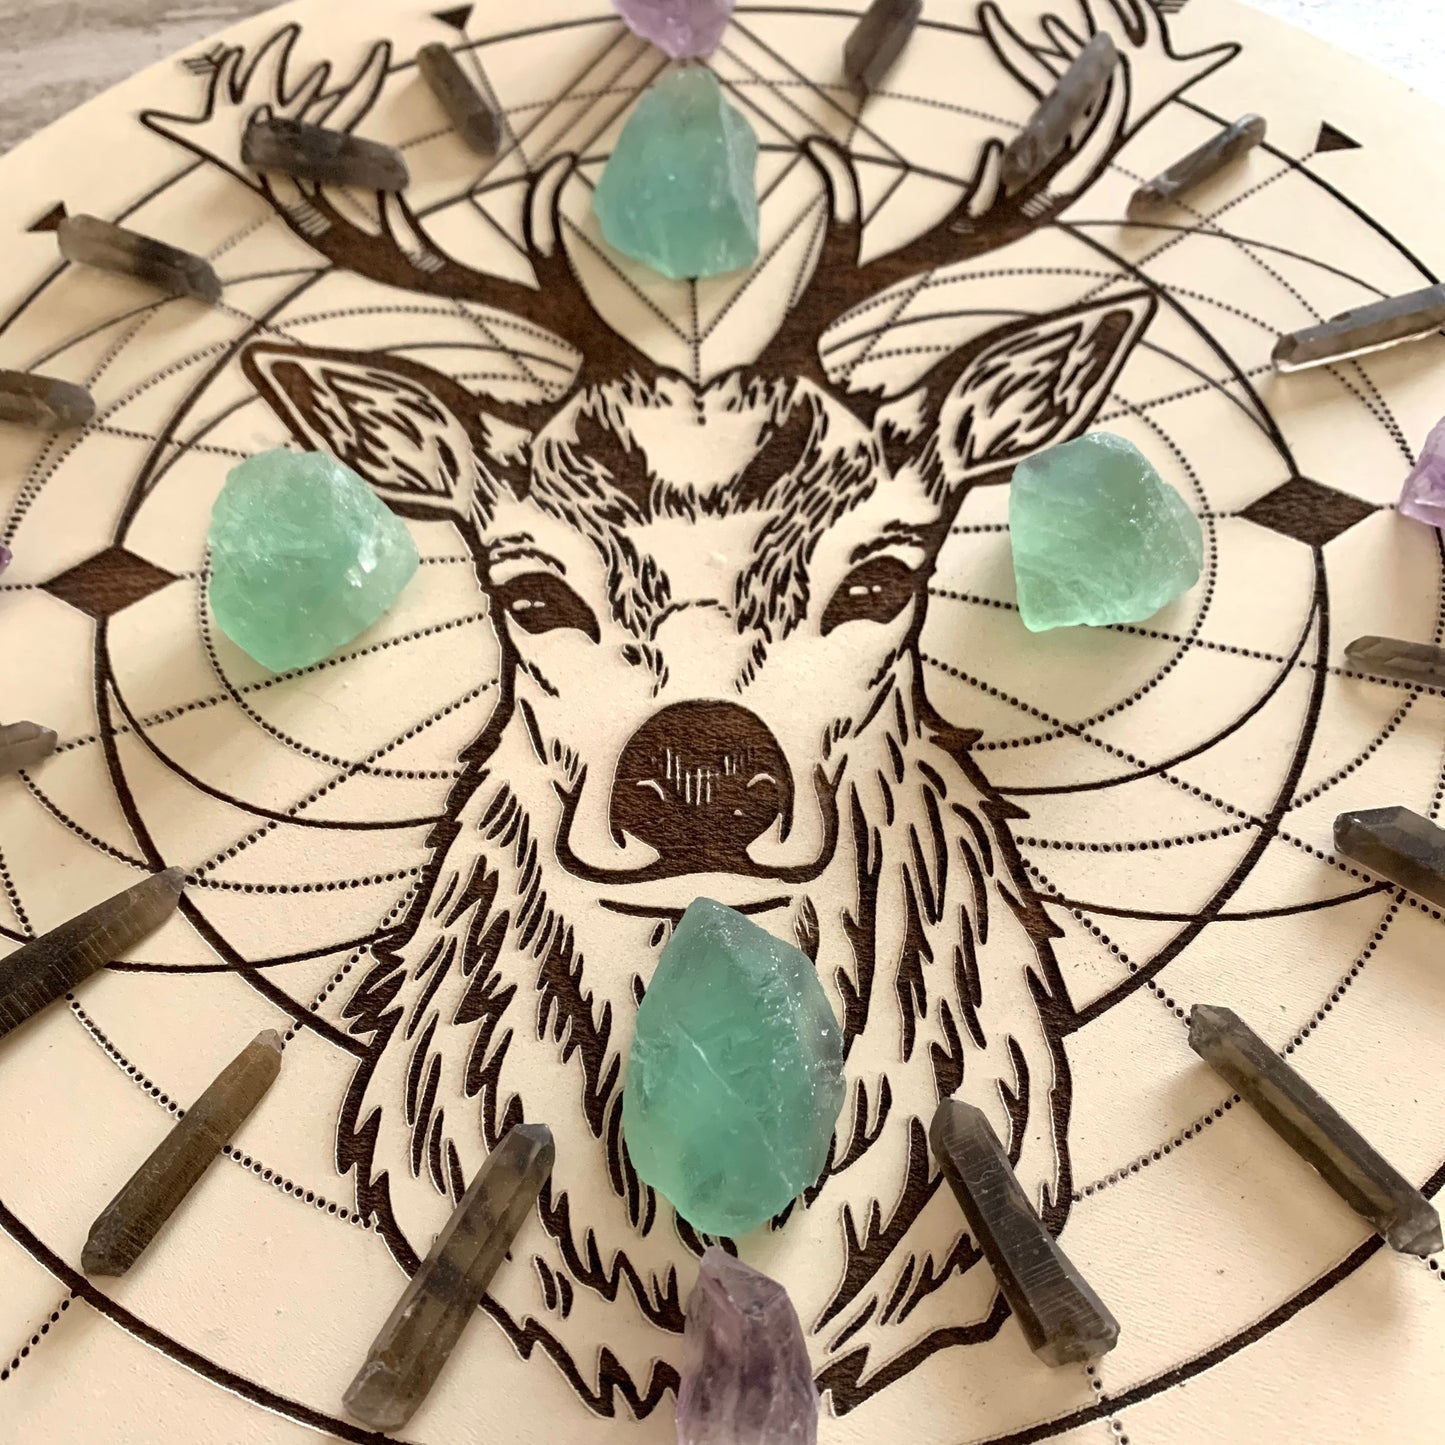 Stag Crystal Grid - Made to Order